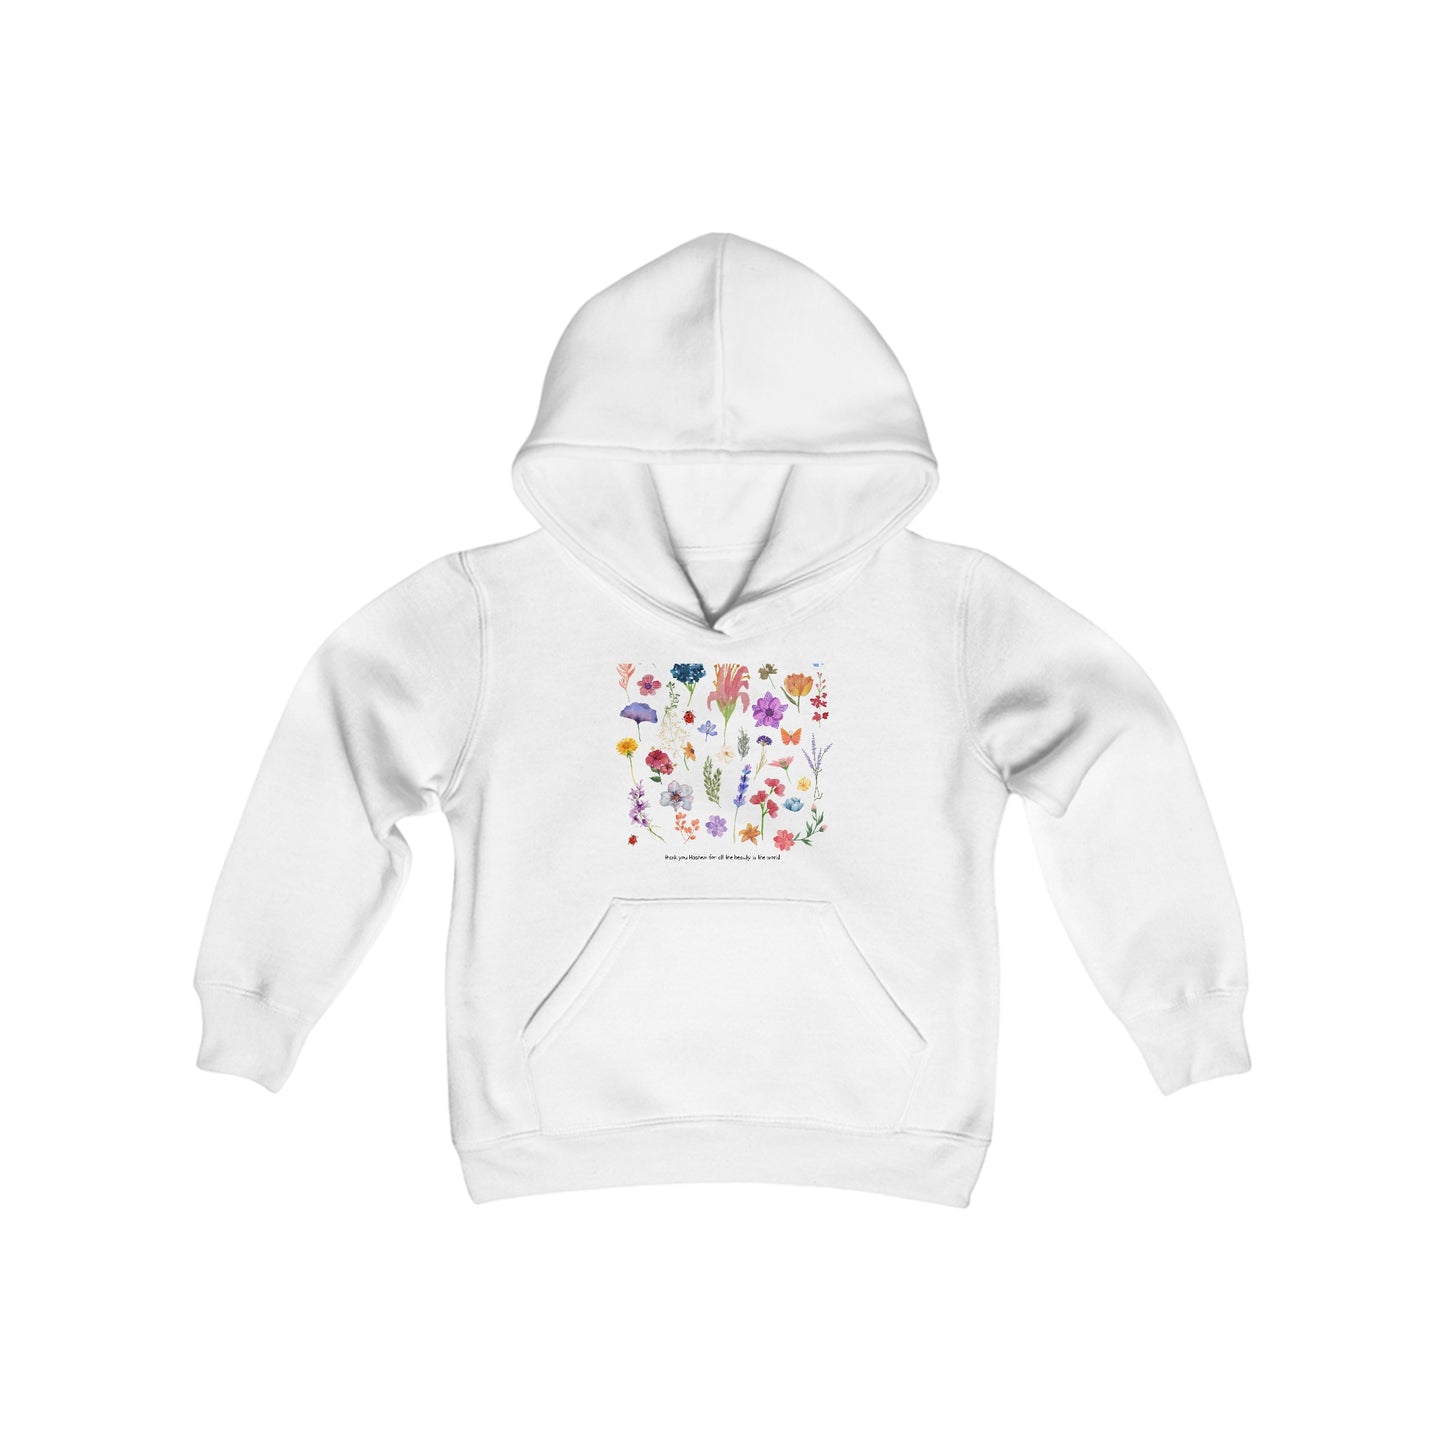 Girls "thank you Hashem for all the beauty in the world" Hooded Sweatshirt